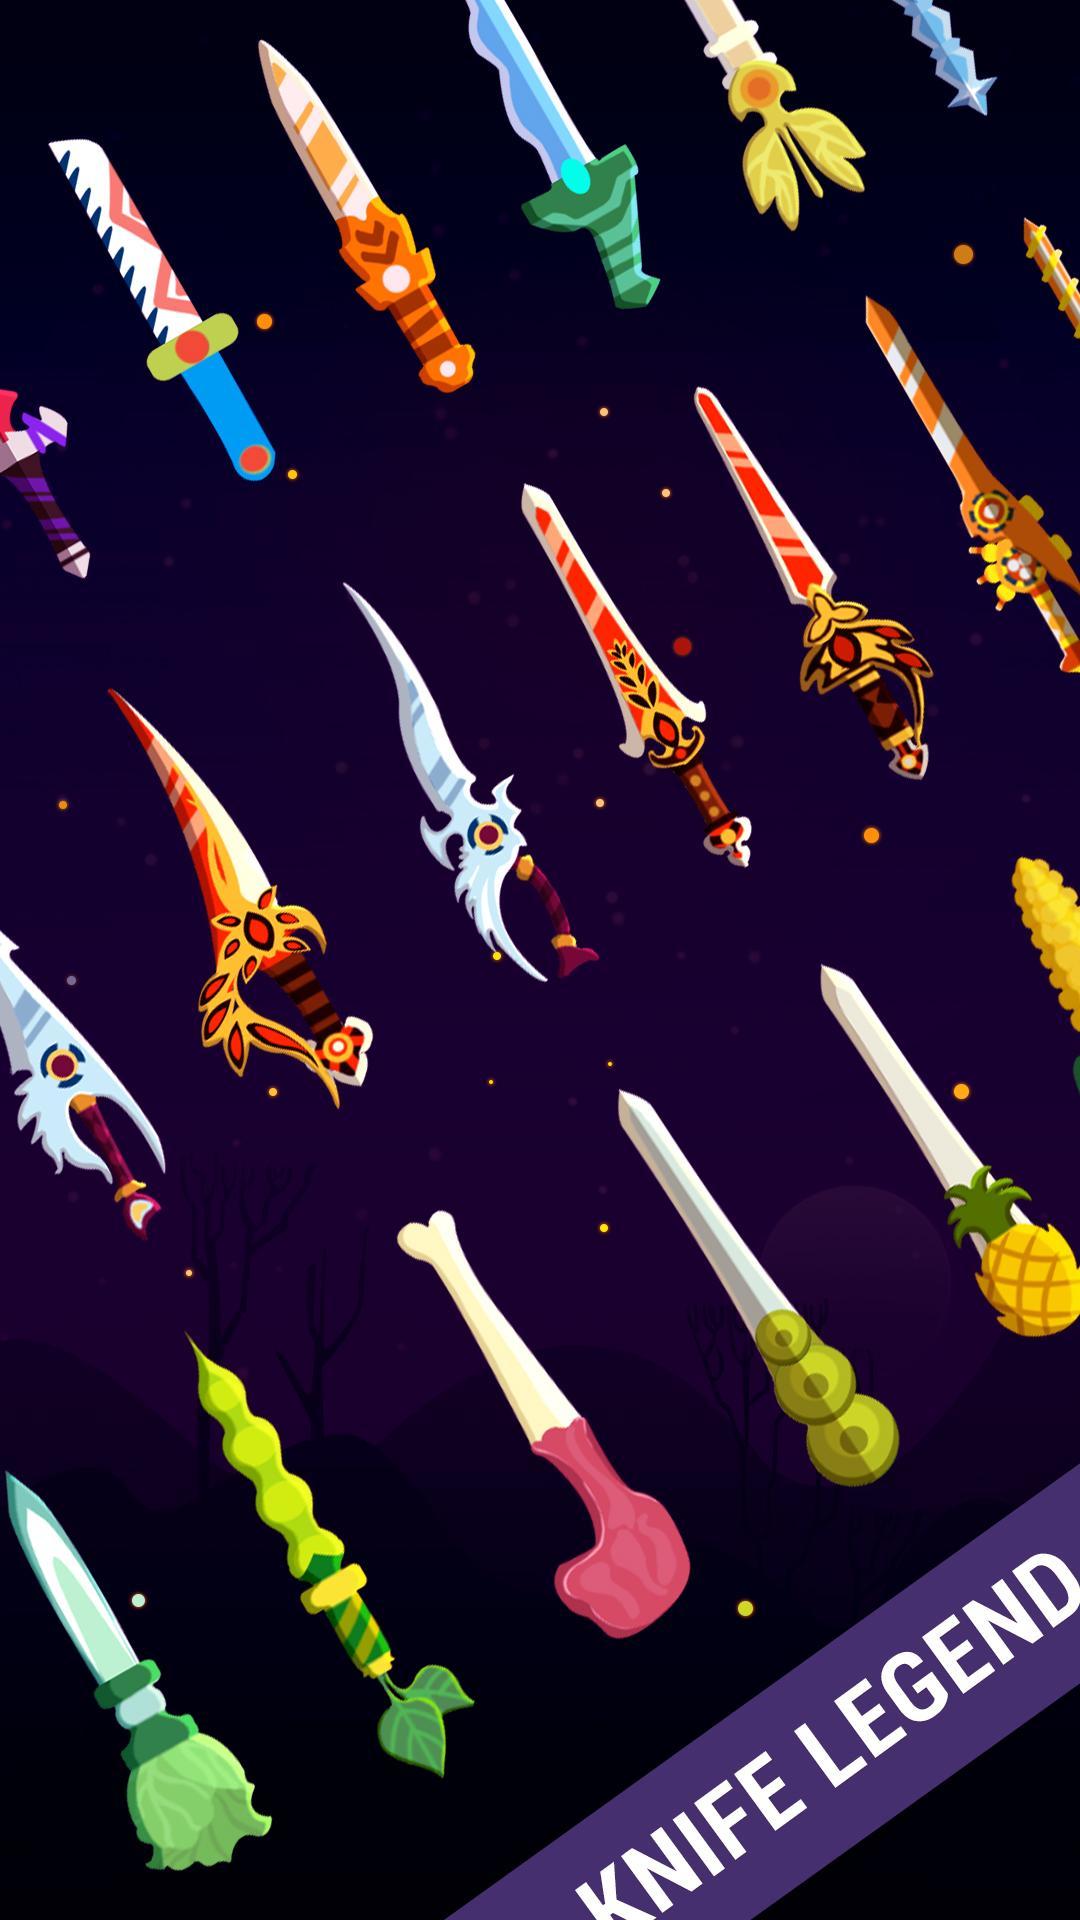 Knife Legend - Knives to rush and hit Fruit & Boss screenshot game